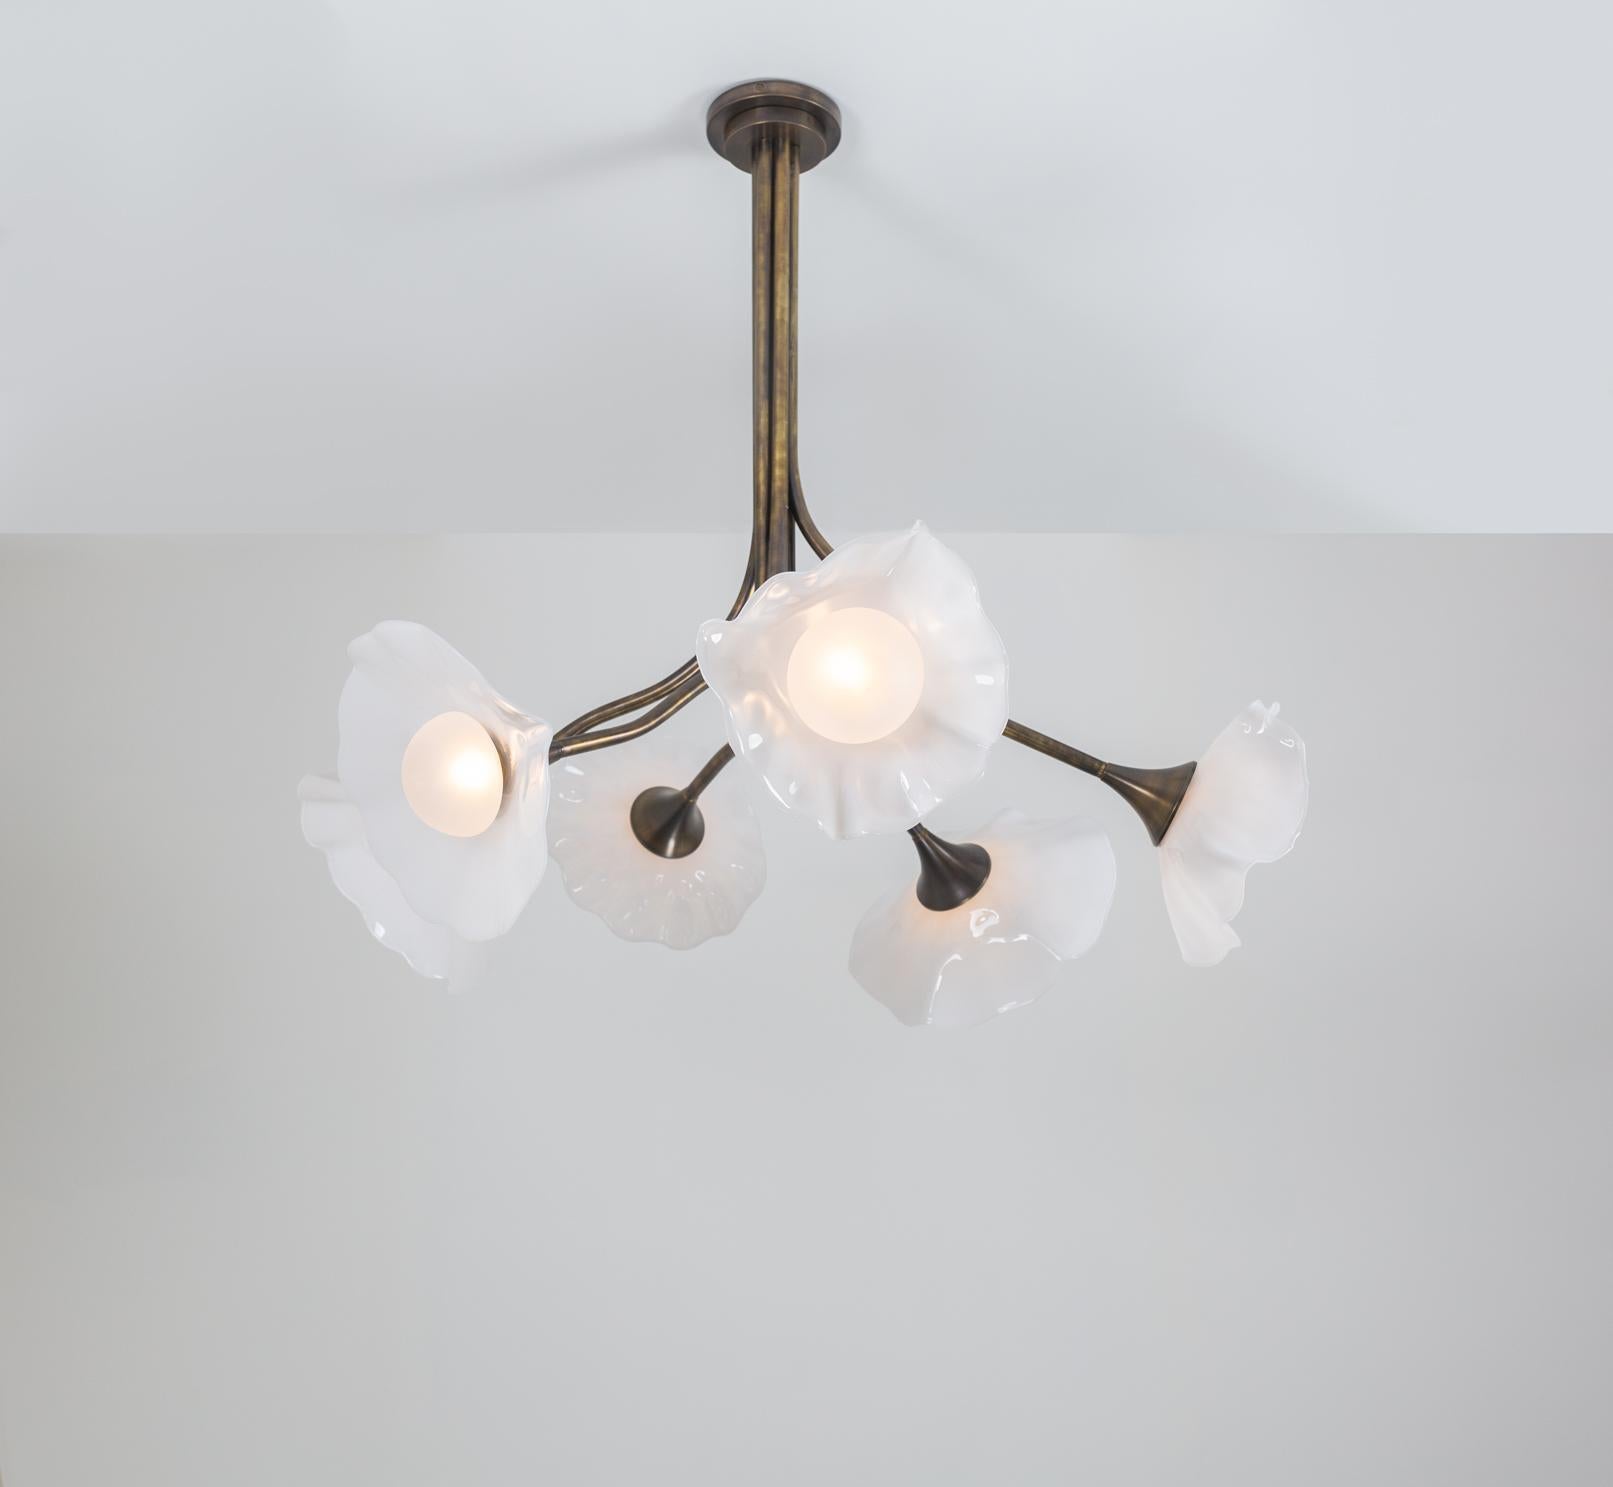 Kalin Asenov designs and fabricates lighting in Savannah, GA. Asenov works with a team of artisans and manufacturers to prototype and build all pieces in his studio.

The clear organic inspiration of Bloom is juxtaposed to the machined brass